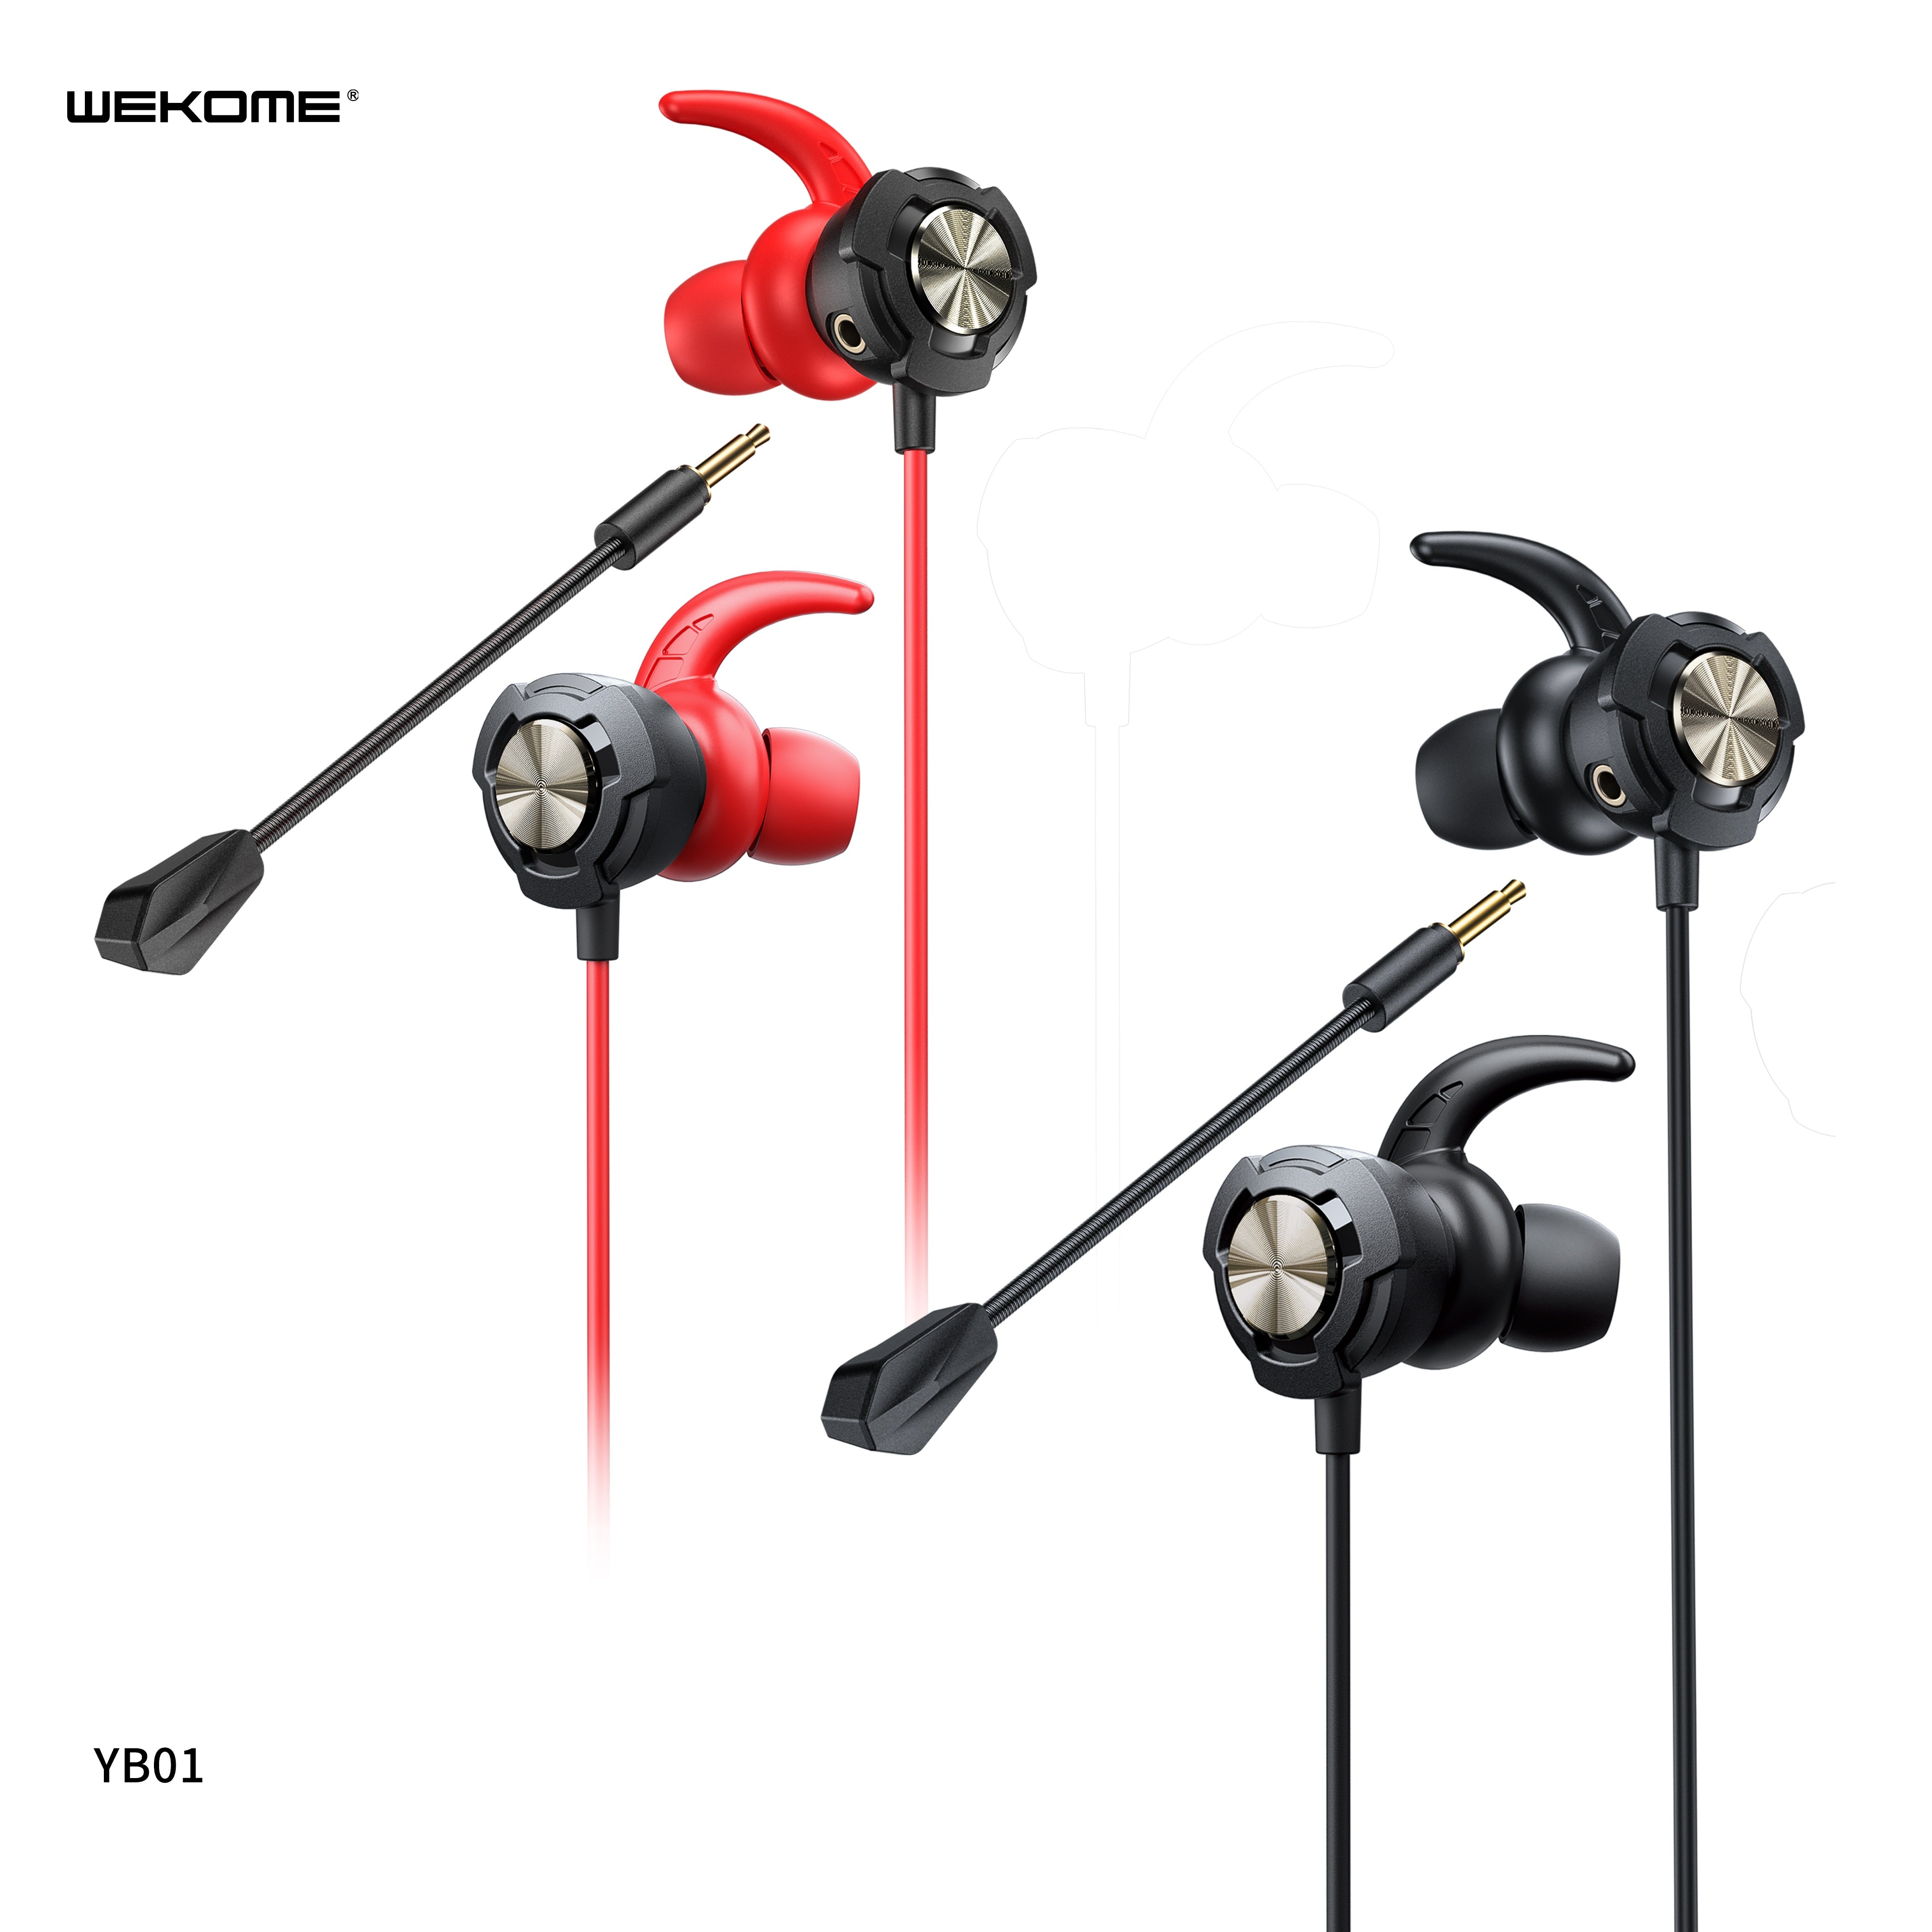 WK YB01 RAIDERS GAMING SERIES IN EAR (WIRED) EARPHONE FOR GAMES WITH MIC, Gaming Earphone, Gaming Earphone with Mic, 3.5mm Gaming Earphone